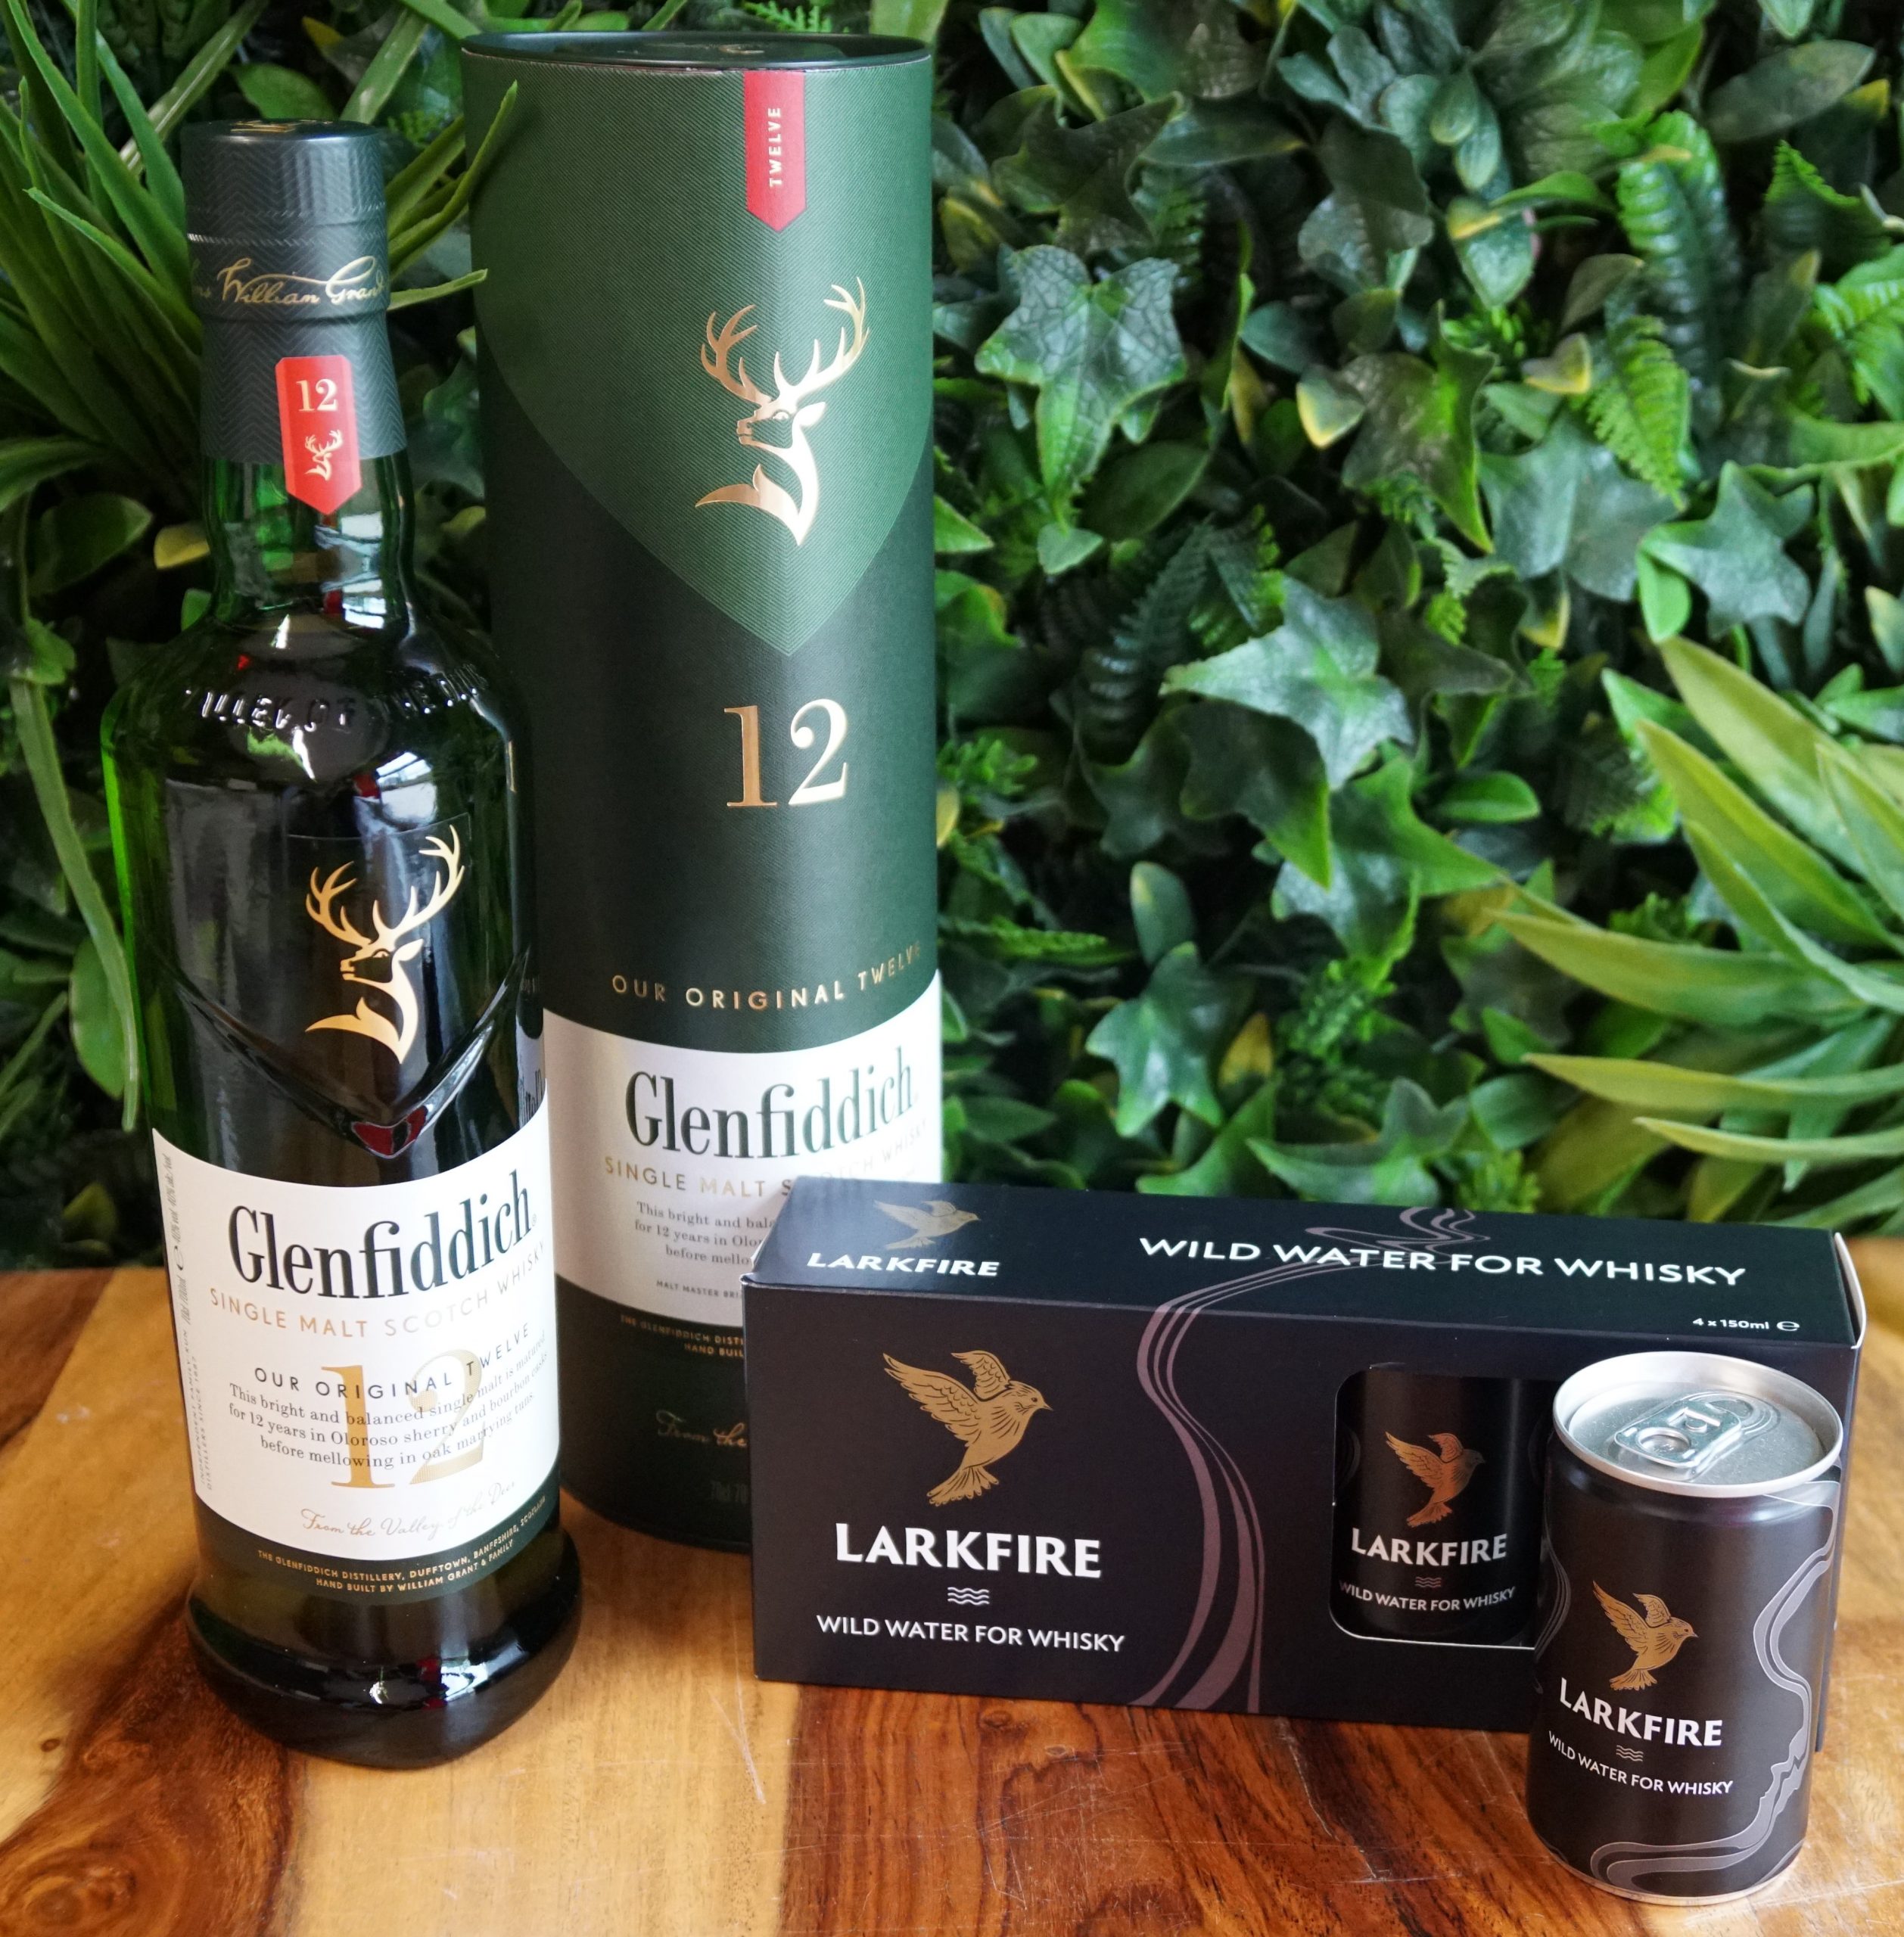 Larkfire partners with William Grant & Sons